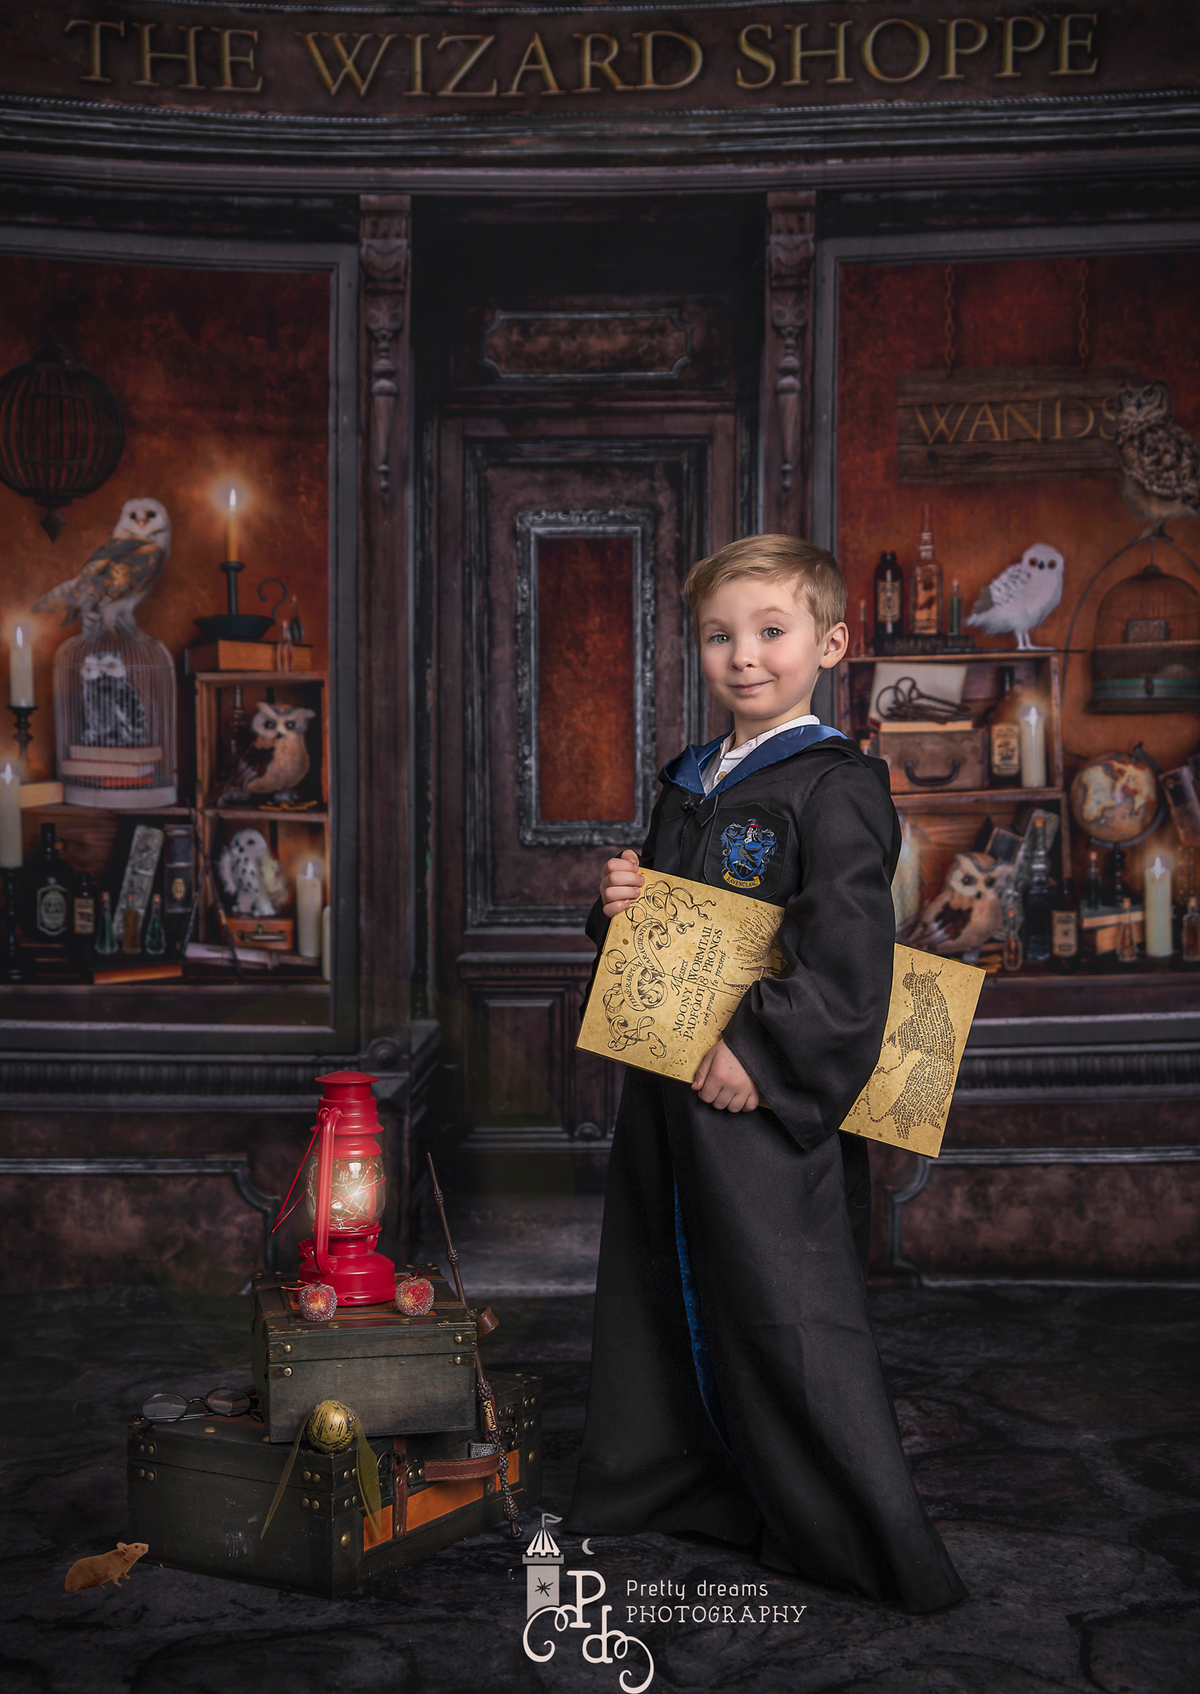 A young boy photographed in a wonderful Harry potter themed set up. He wears a blue robe and stands next to a lantern and pile of vintage suitcases. Photographed in Sonia Gourlie Fine Art Photography's studio in Ottawa.